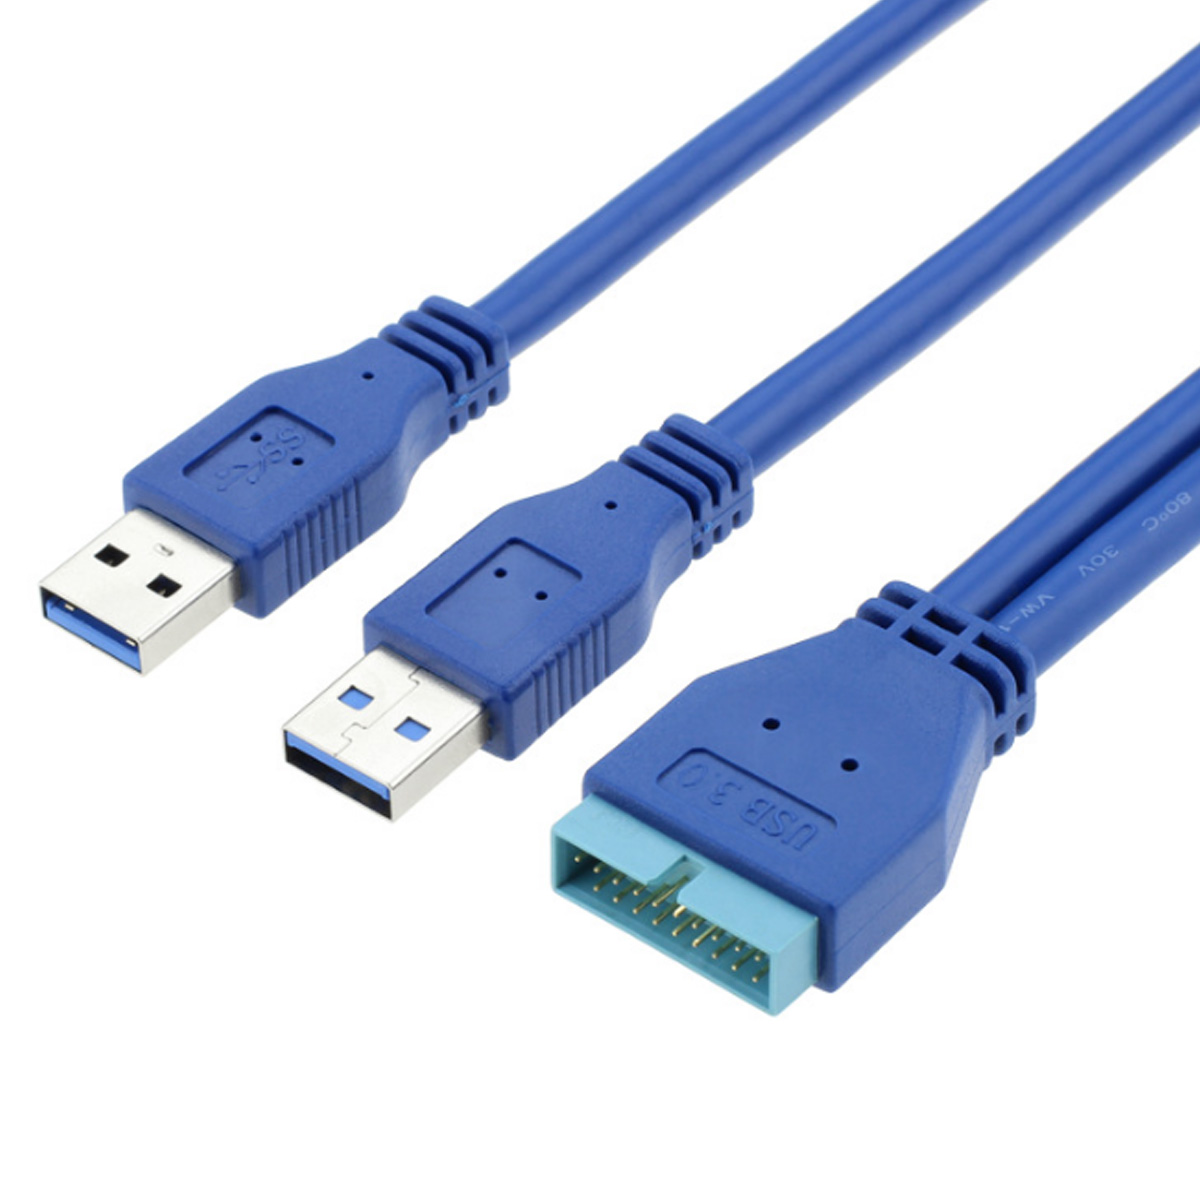 

25cm Dual USB 3.0 to 20Pin Adapter Data Cable for Motherboard Expansion